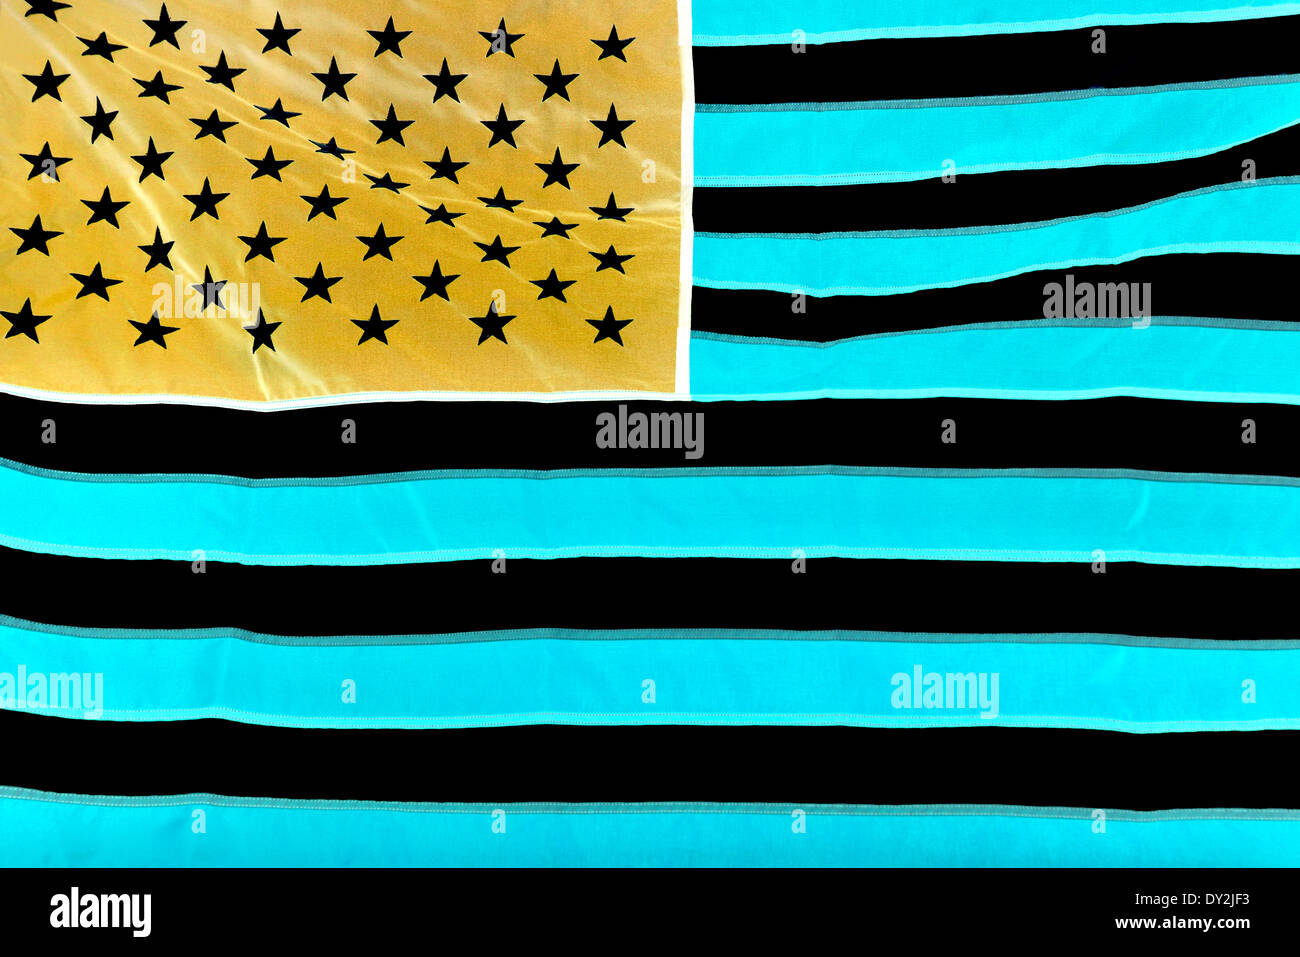 The national flag of the United States of America negative version. Stock Photo